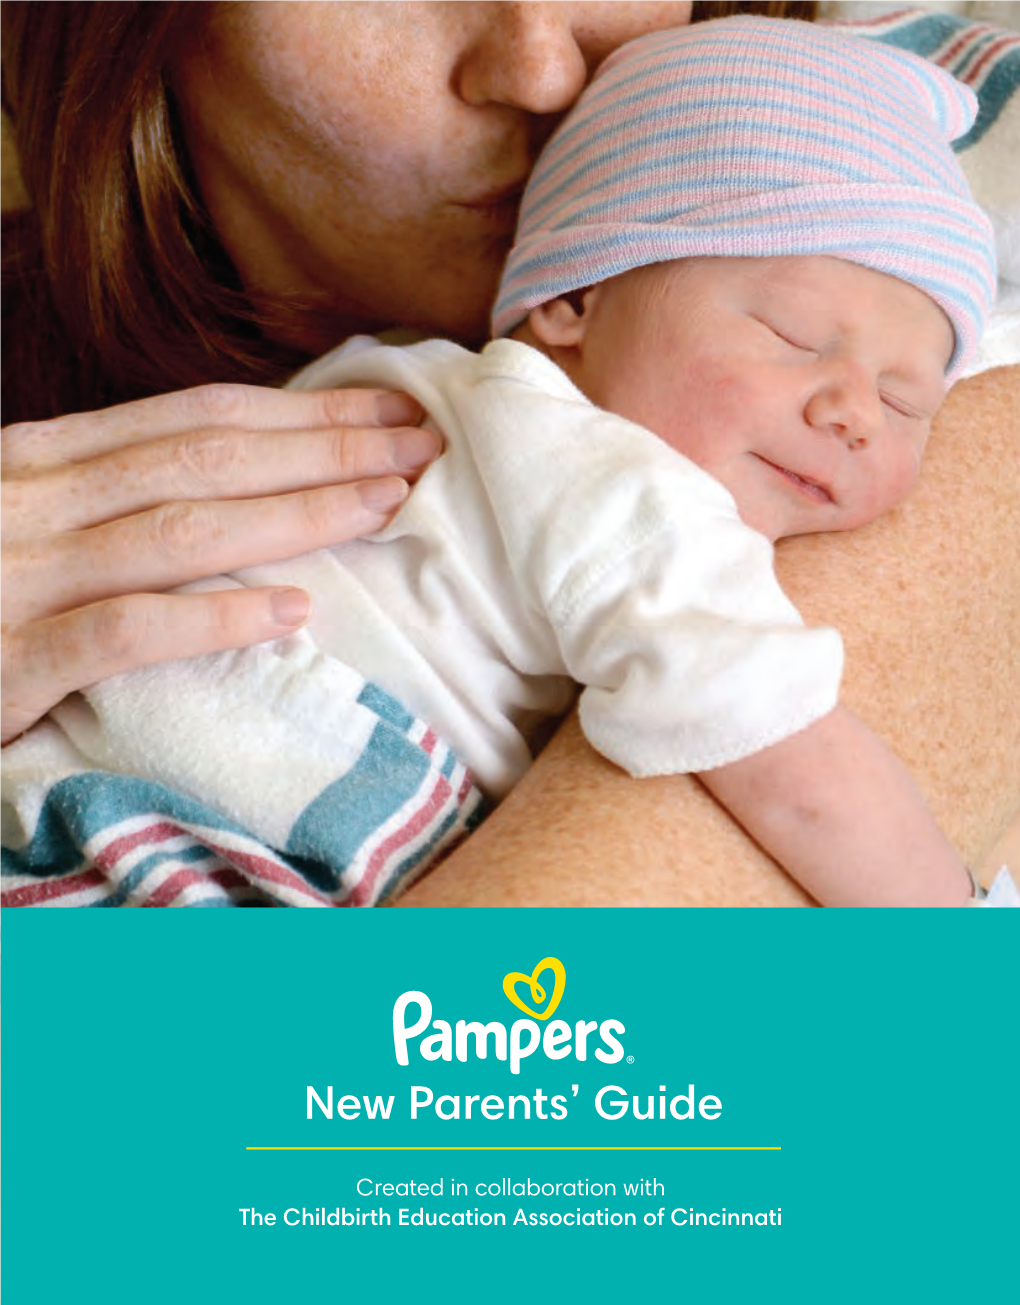 New Parents' Guide